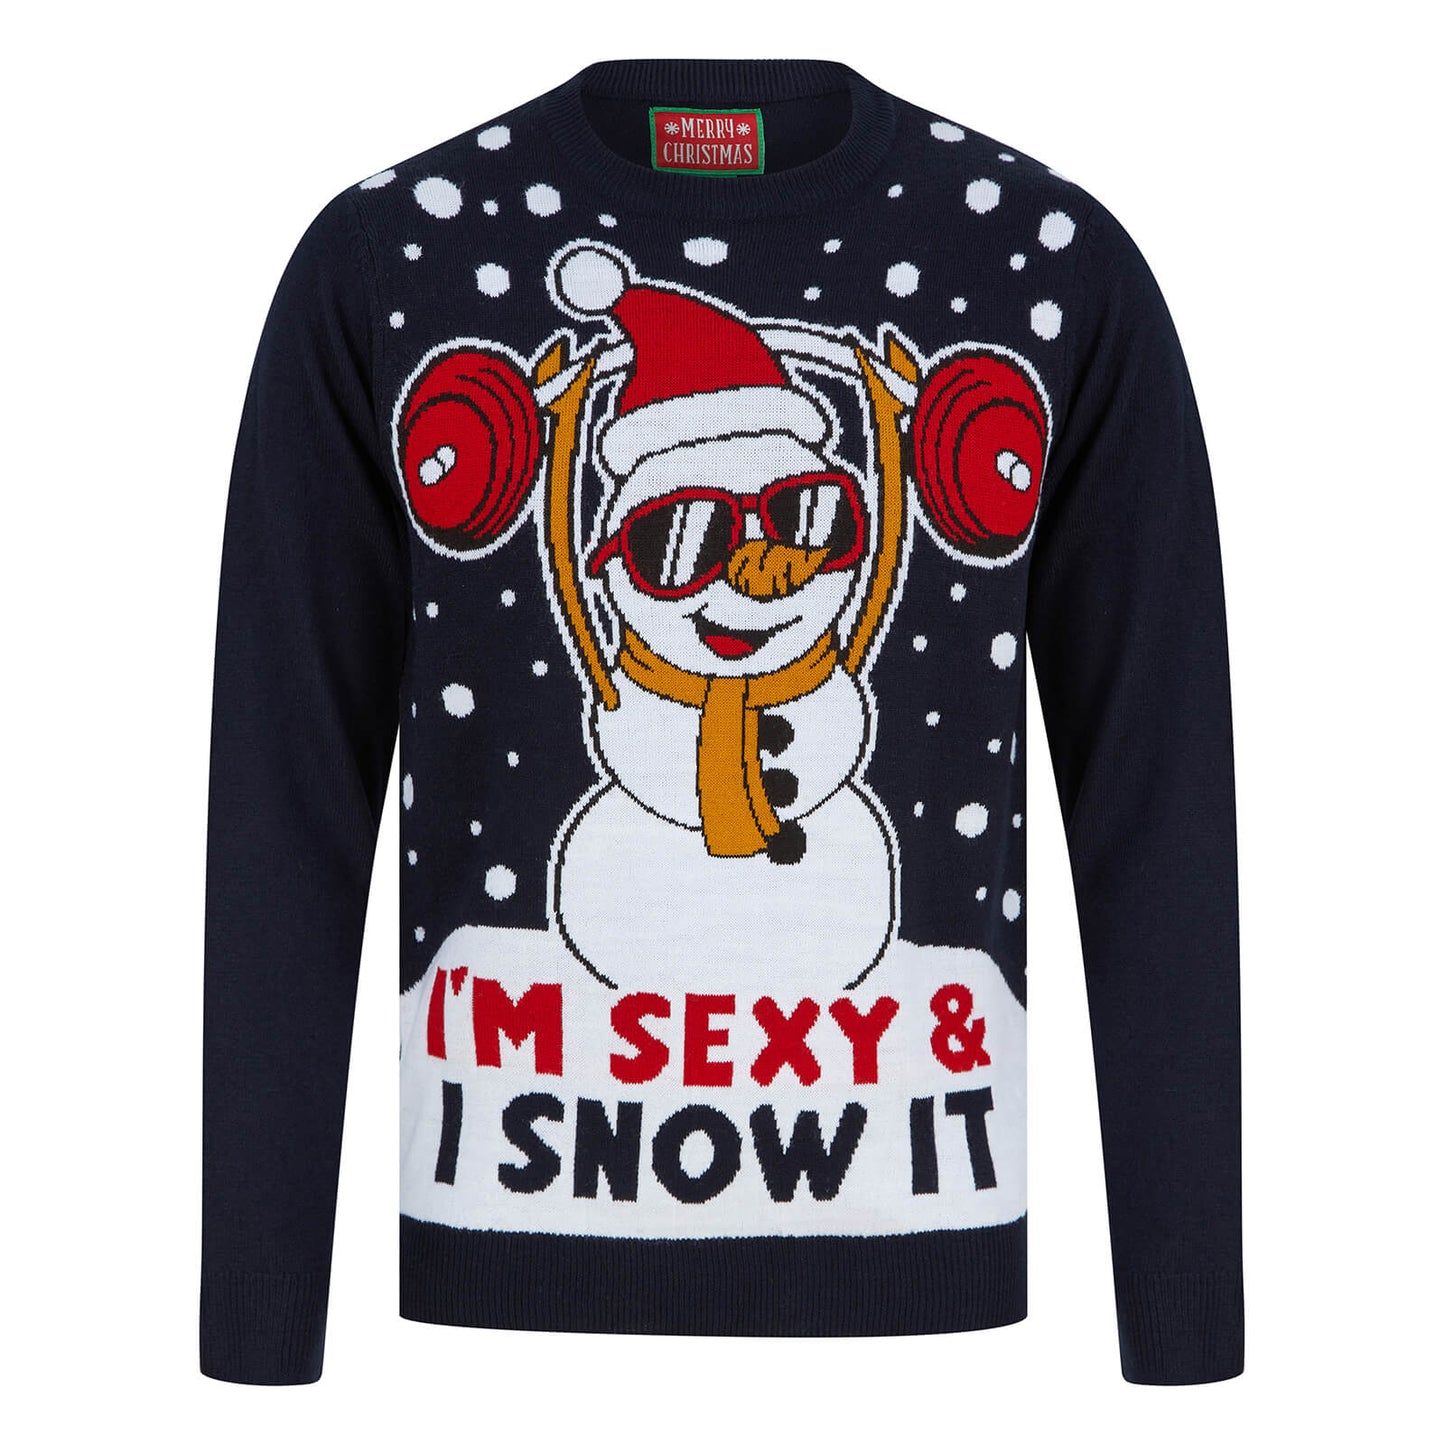 Mr Crimbo Mens Weightlifting Sexy & I Snow It Christmas Jumper Ink